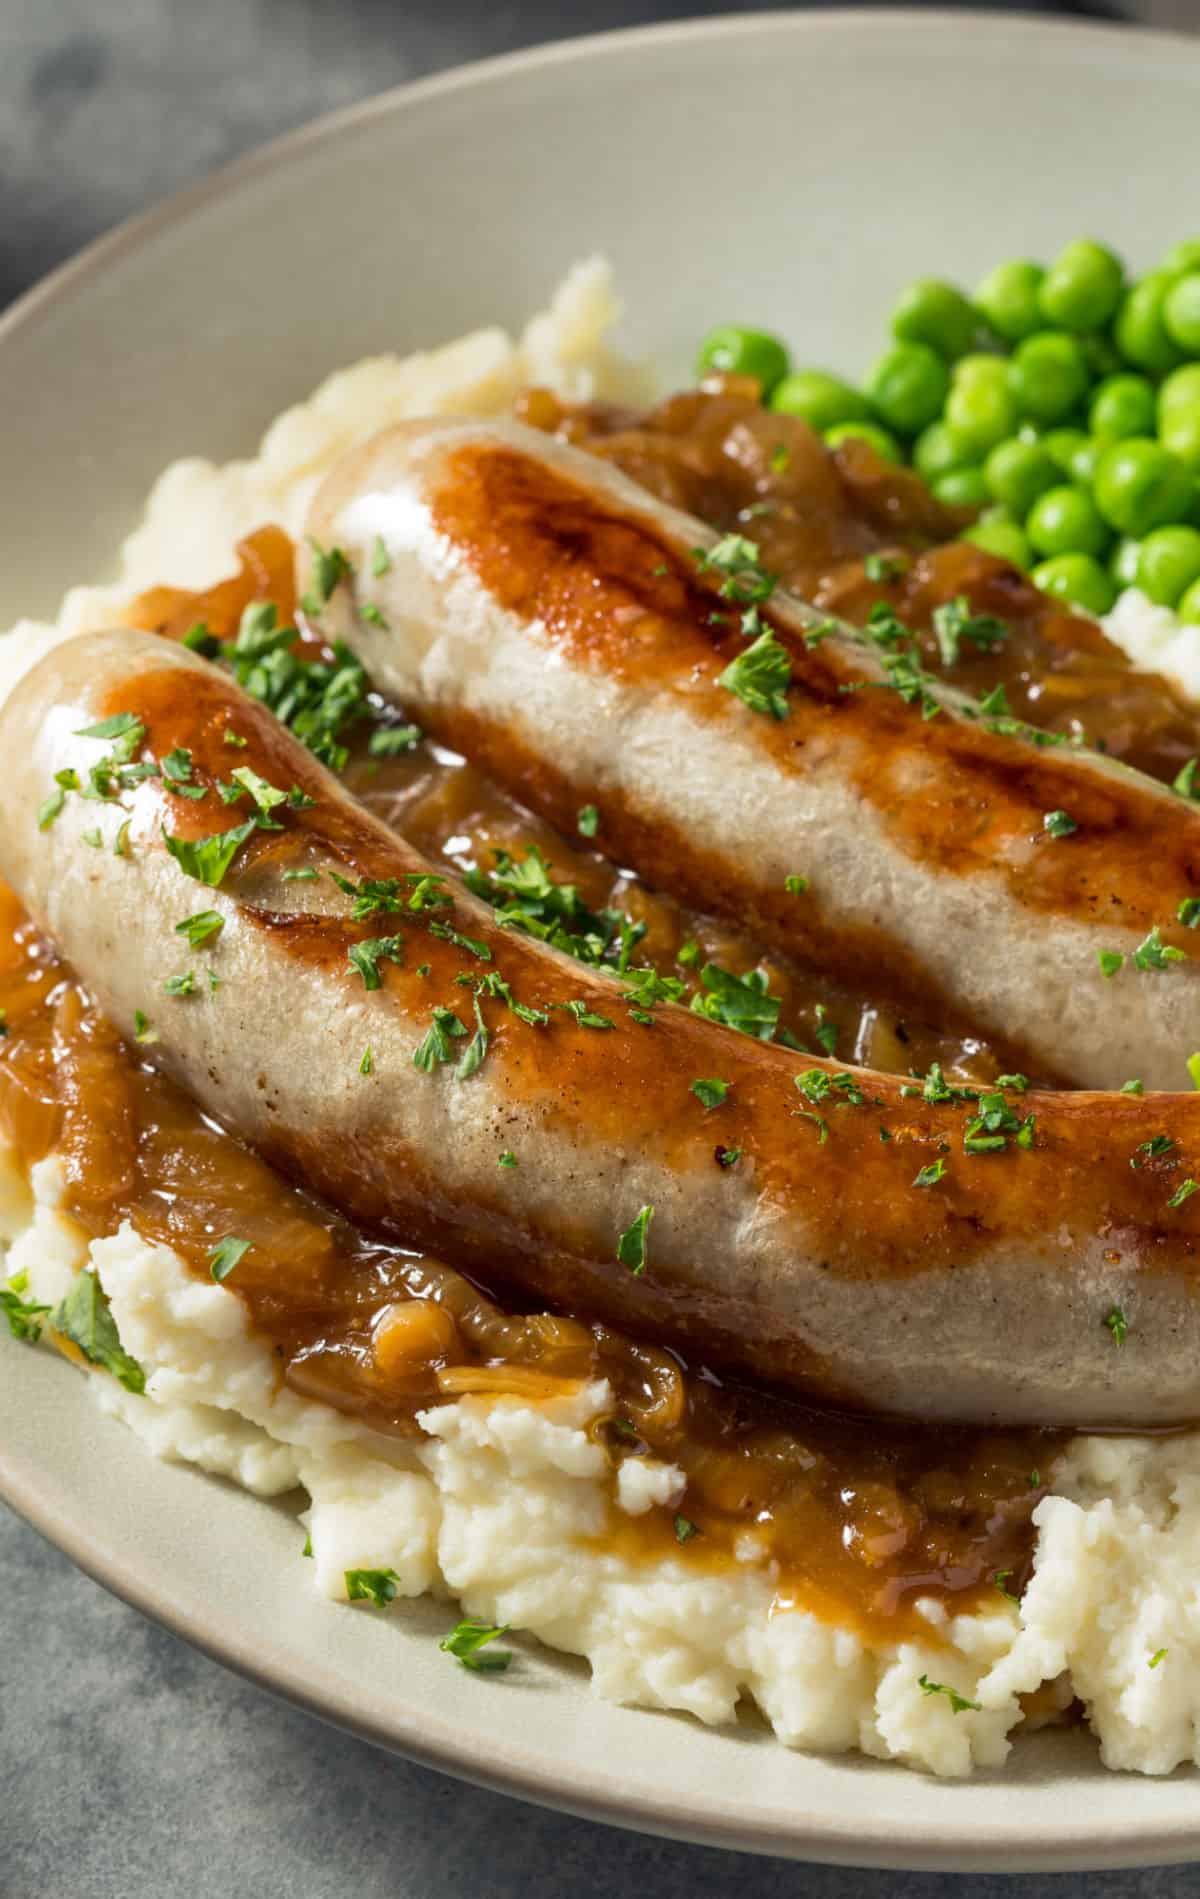 Sausages and mash on a plate.